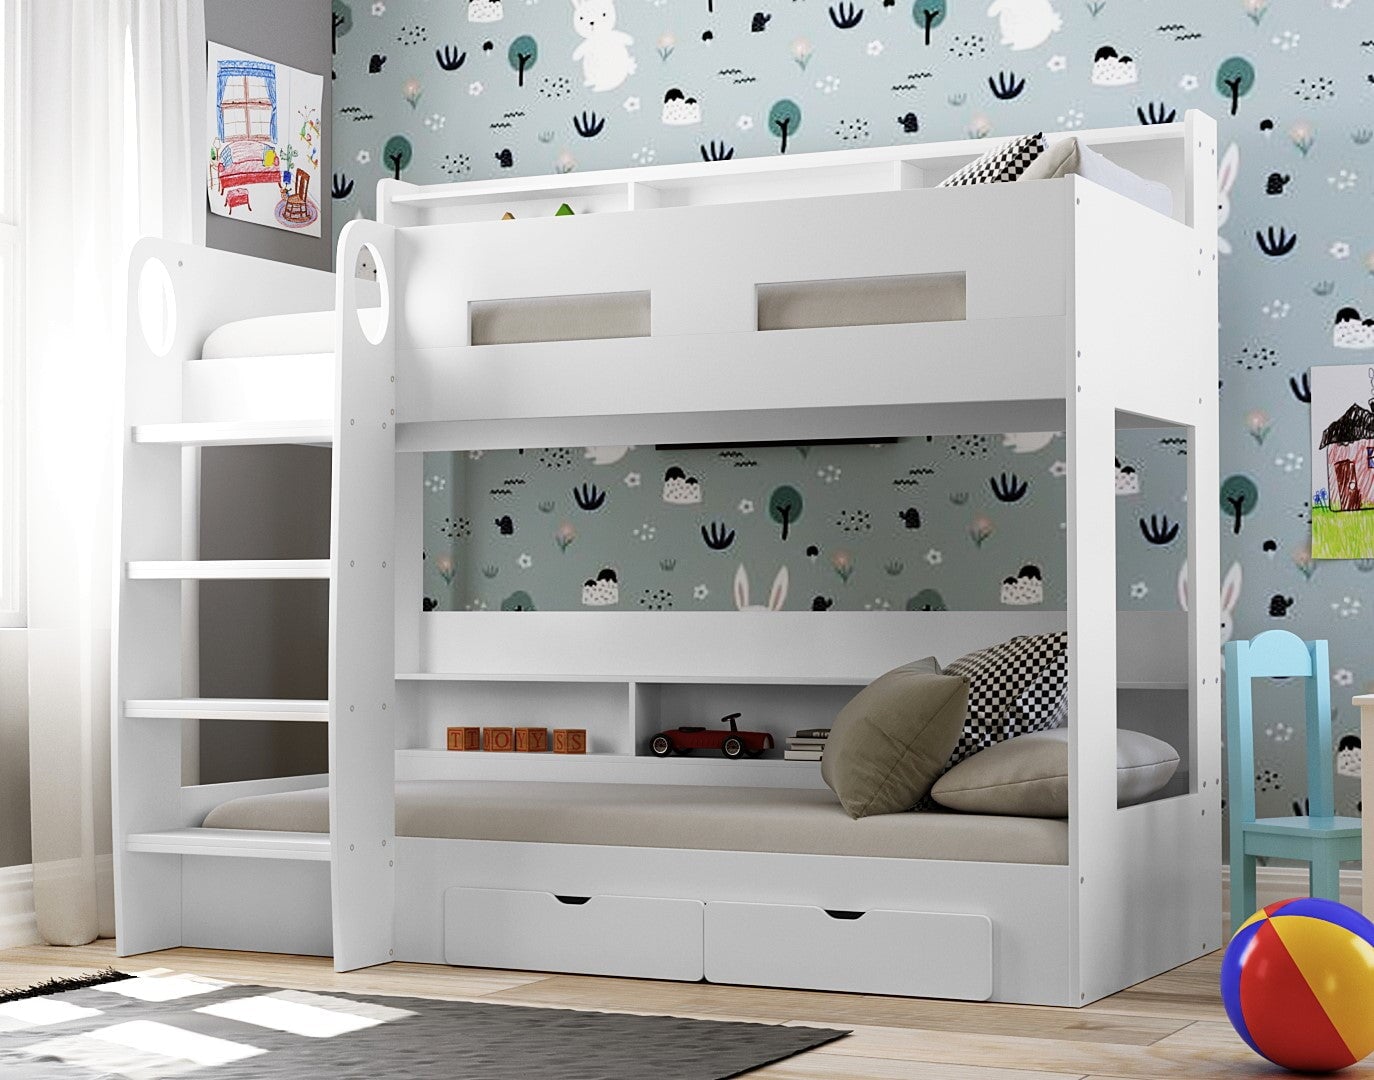 Oasis White Bunk Bed Frame with Storage Drawers & Shelves - 3ft Single Casa Maria Designs 